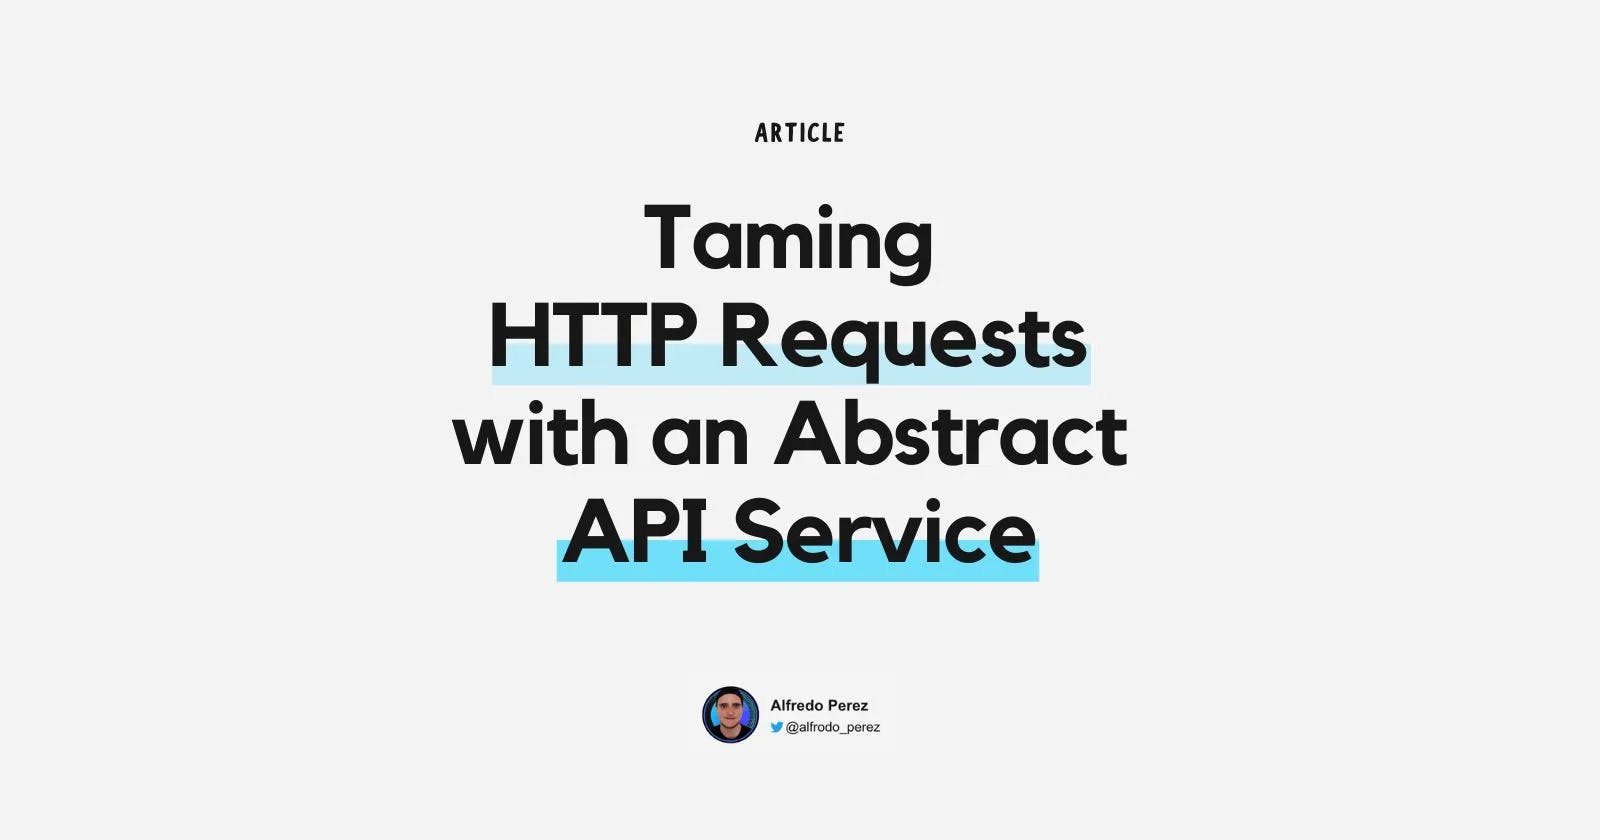 Taming HTTP Requests with an Abstract API Service